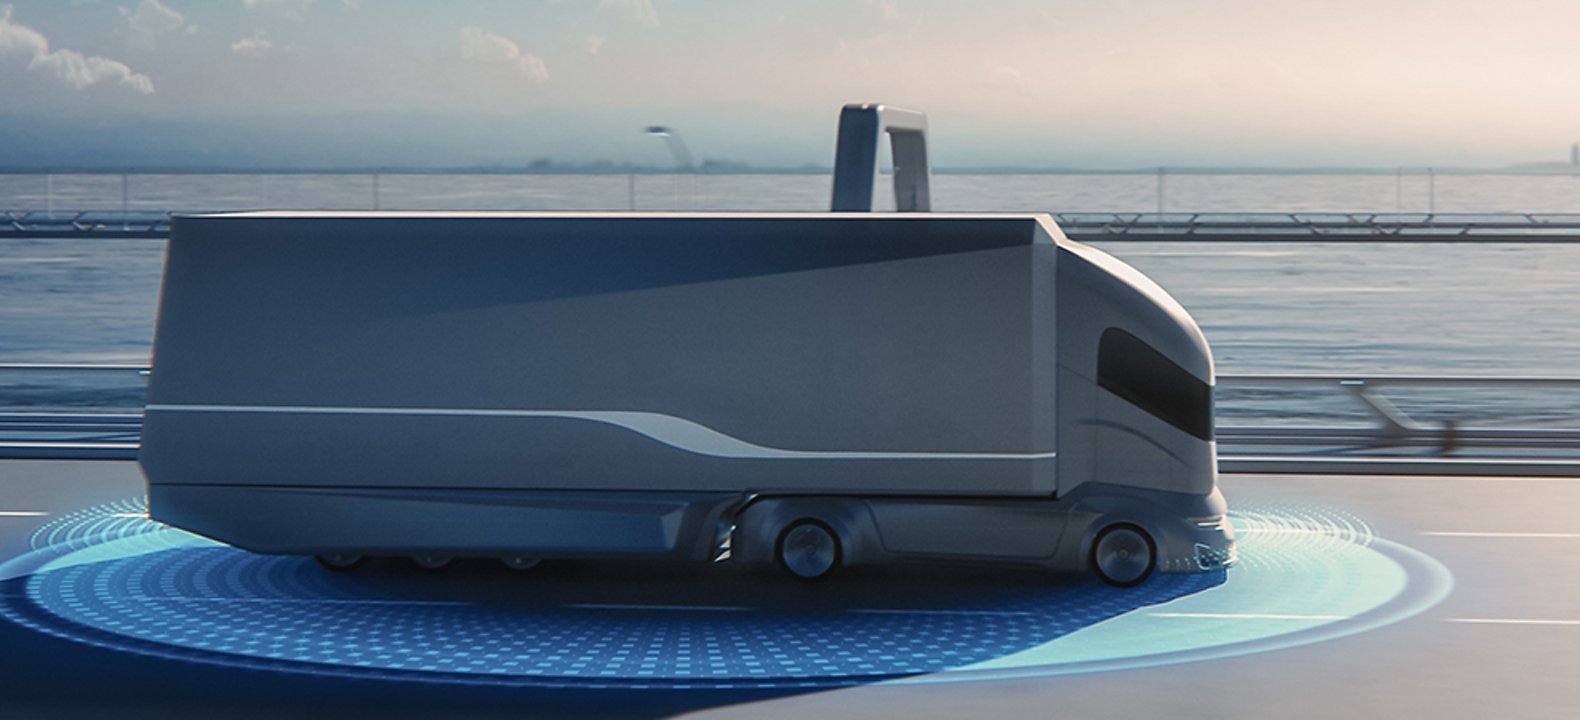 Self-driving tractor trailer moves along a coastal highway